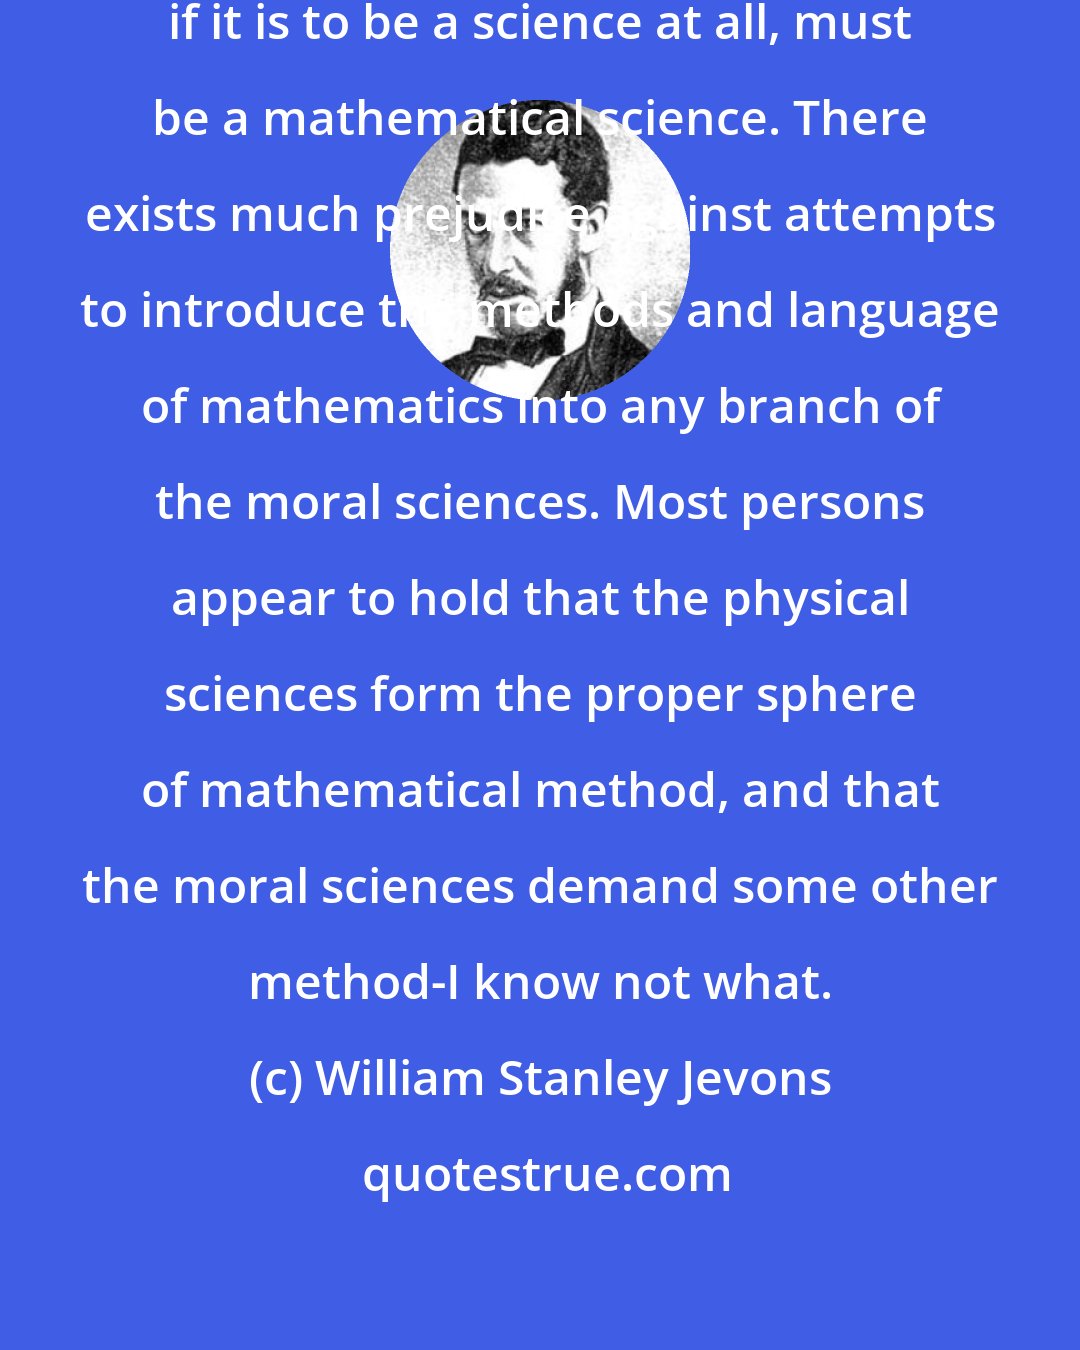 William Stanley Jevons: It seems perfectly clear that Economy, if it is to be a science at all, must be a mathematical science. There exists much prejudice against attempts to introduce the methods and language of mathematics into any branch of the moral sciences. Most persons appear to hold that the physical sciences form the proper sphere of mathematical method, and that the moral sciences demand some other method-I know not what.